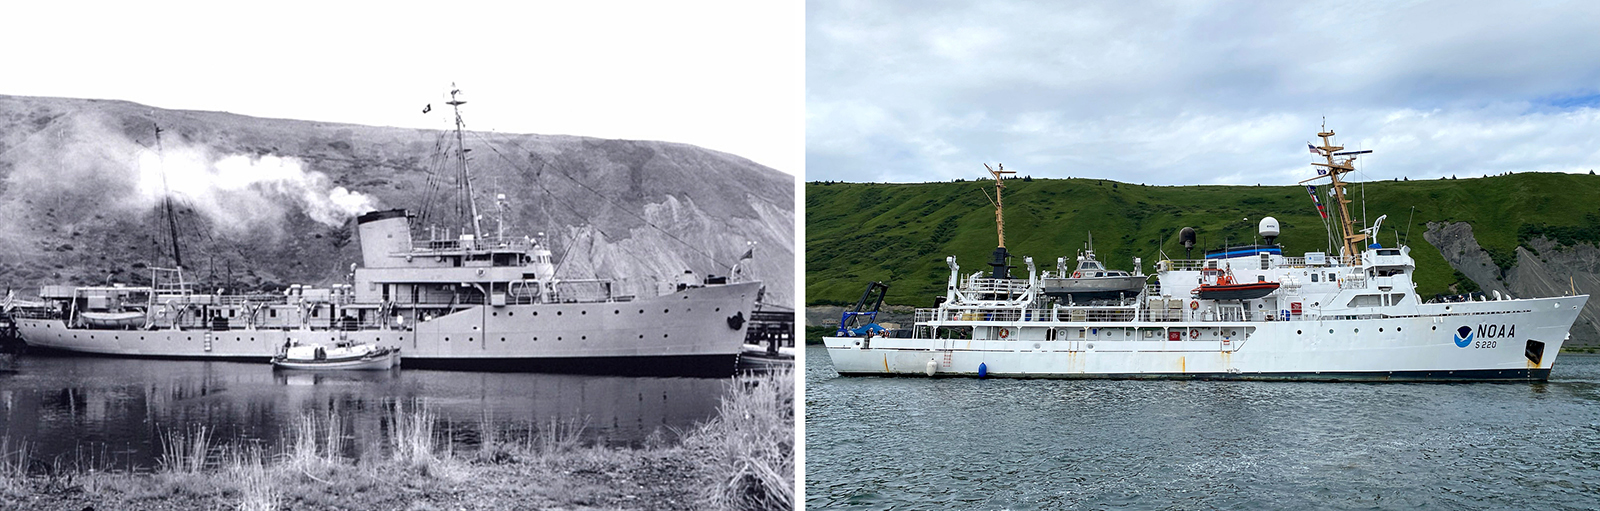 Two images of Pathfinder and Fairweather lined up side by side.